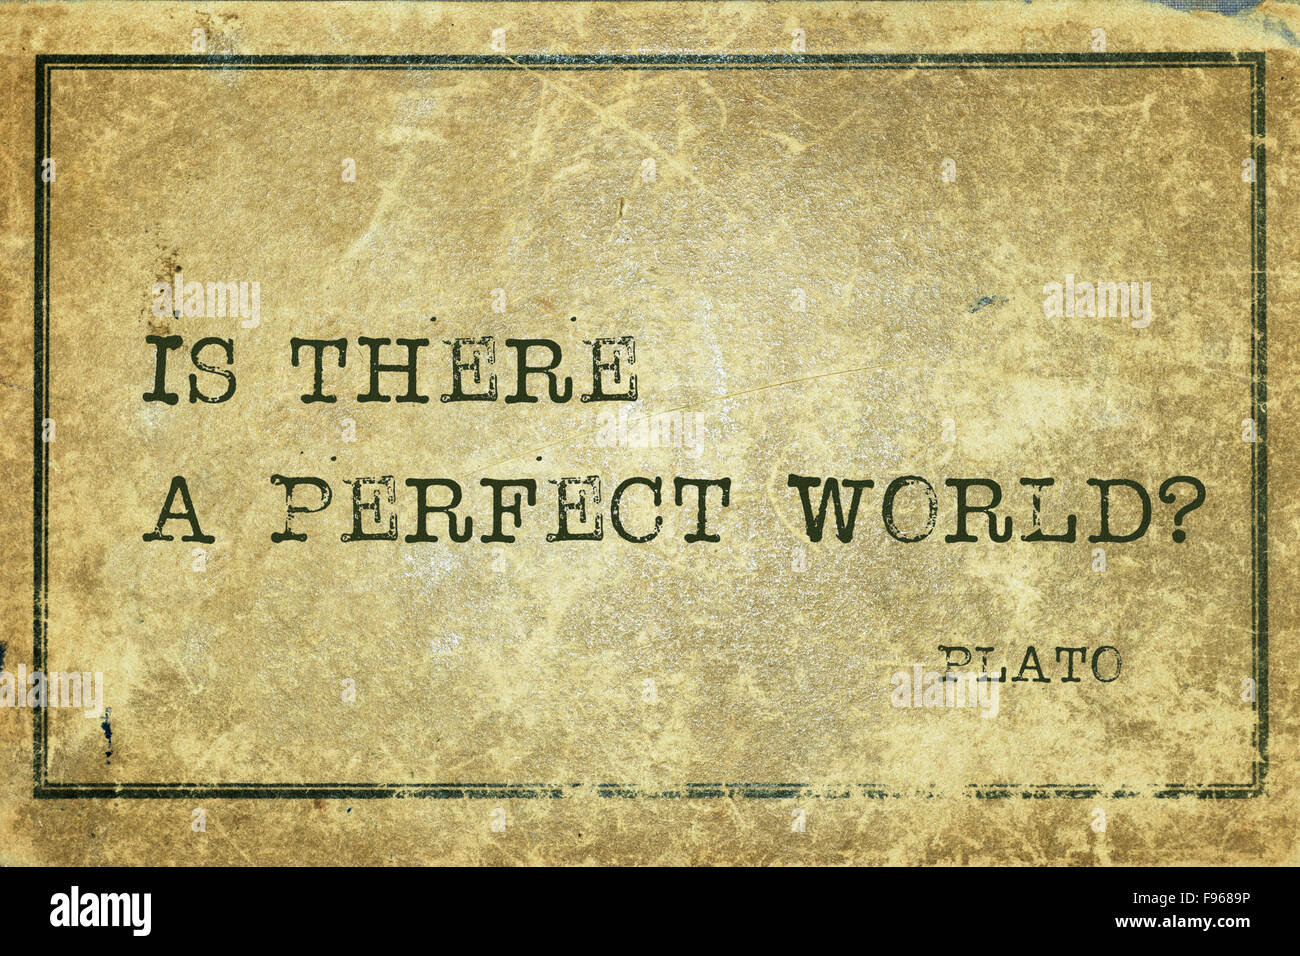 Is there a perfect world?- ancient Greek philosopher Plato quote printed on grunge vintage cardboard Stock Photo